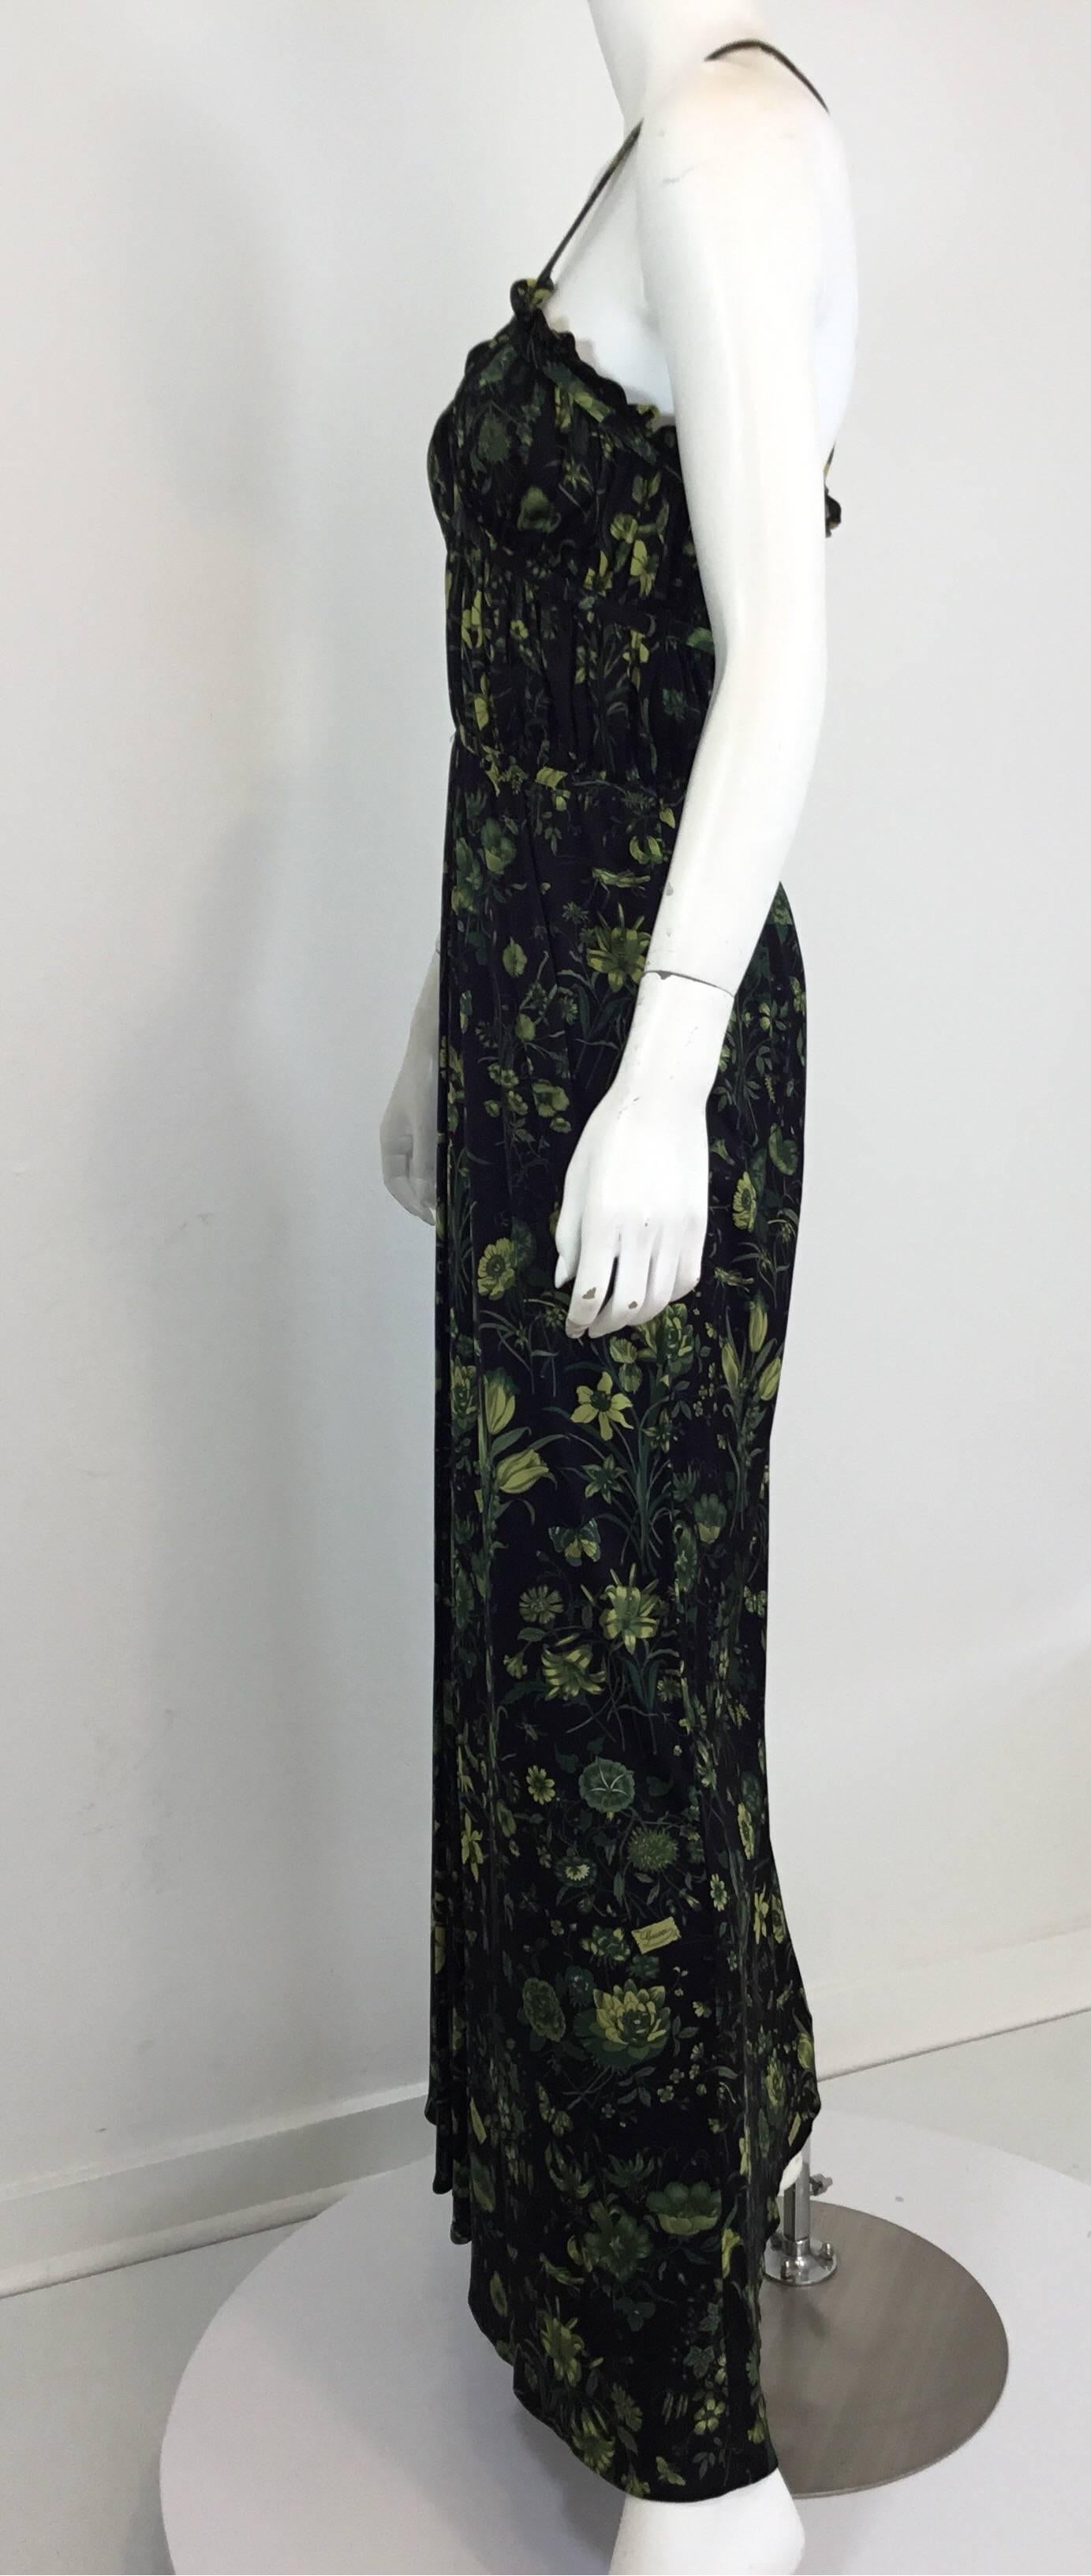 Gucci maxi dress in black with a green floral/butterfly print throughout, cross straps at the back, and a zipper fastening along the side. Dress is labeled a size 44, made in Italy. 65% acetate, 35% polyamide. 

Measurements: Jersey has stretch
bust